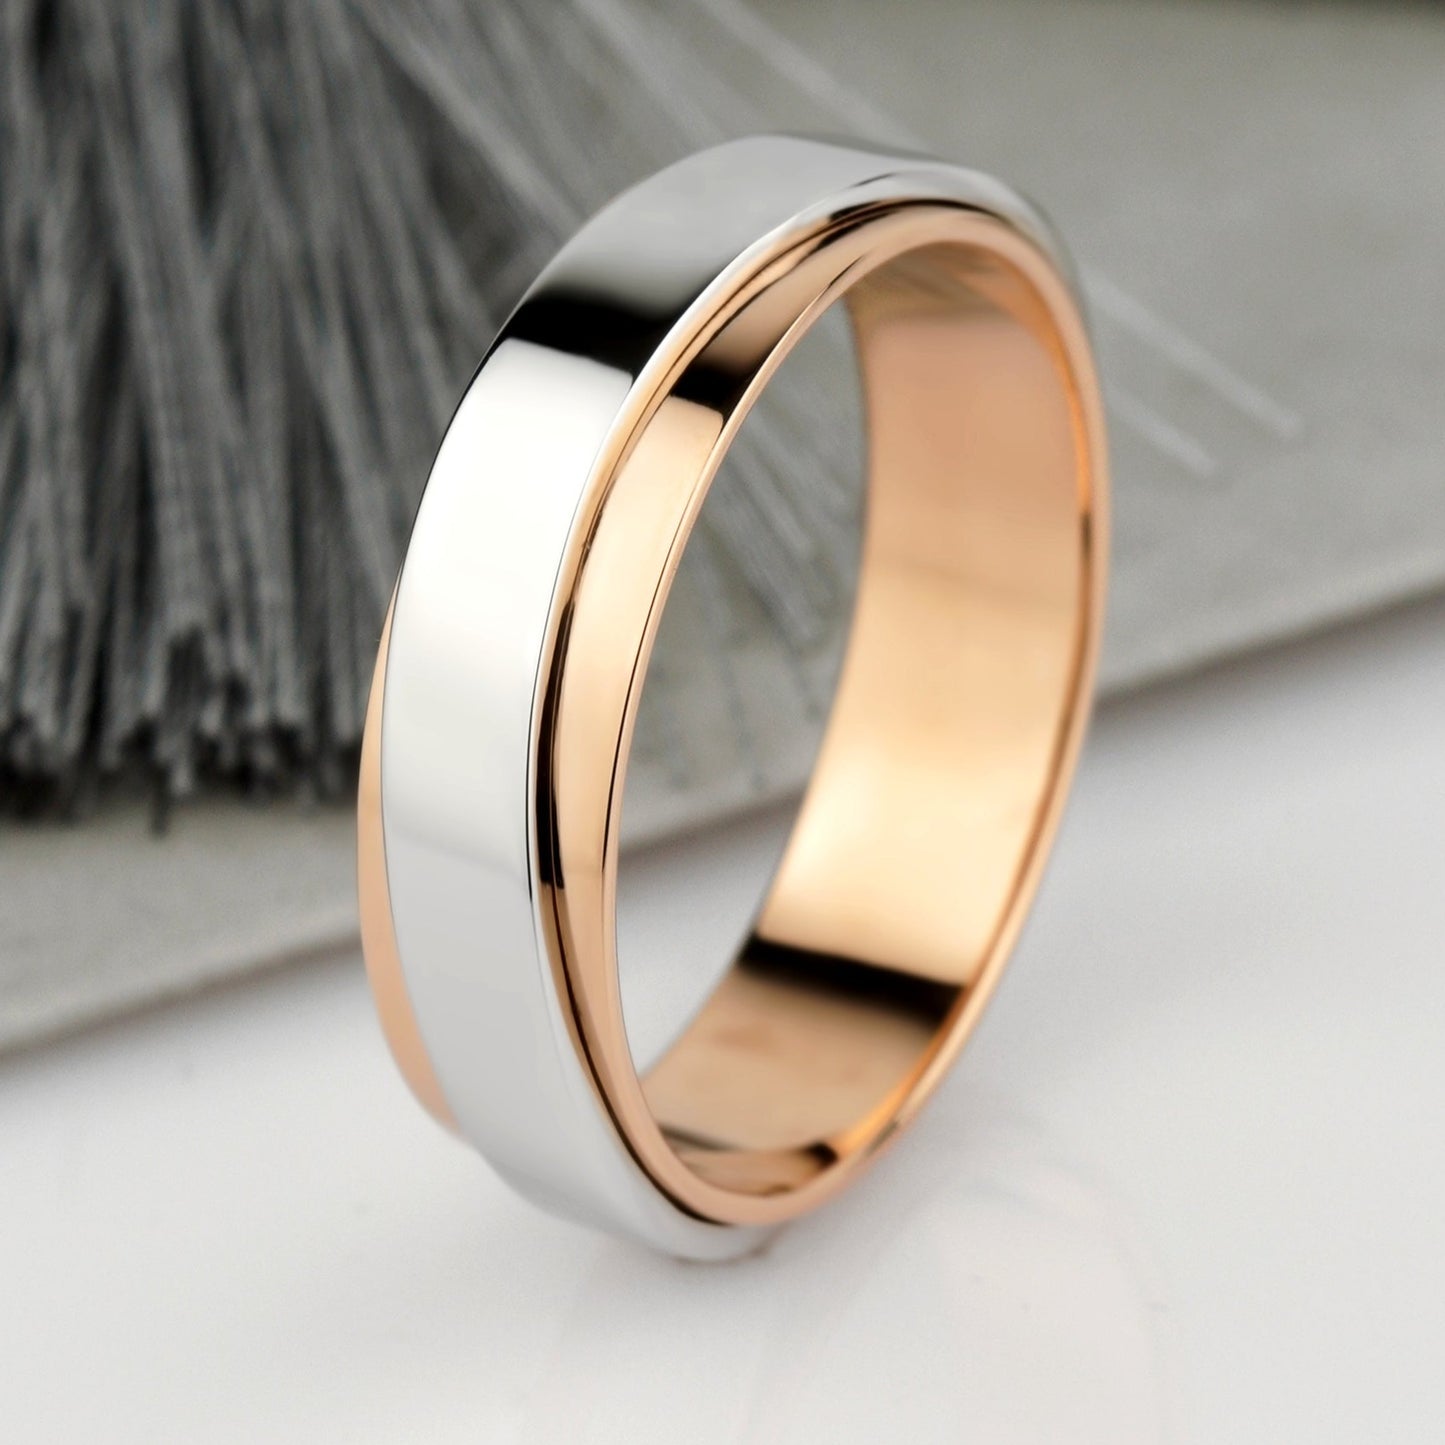 Matching couple rings set. Gold wedding bands set. Promise rings. Unique wedding bands. Two tone wedding bands. His and hers wedding bands. Unusual wedding rings. His and hers gold rings. Two tone wedding bands